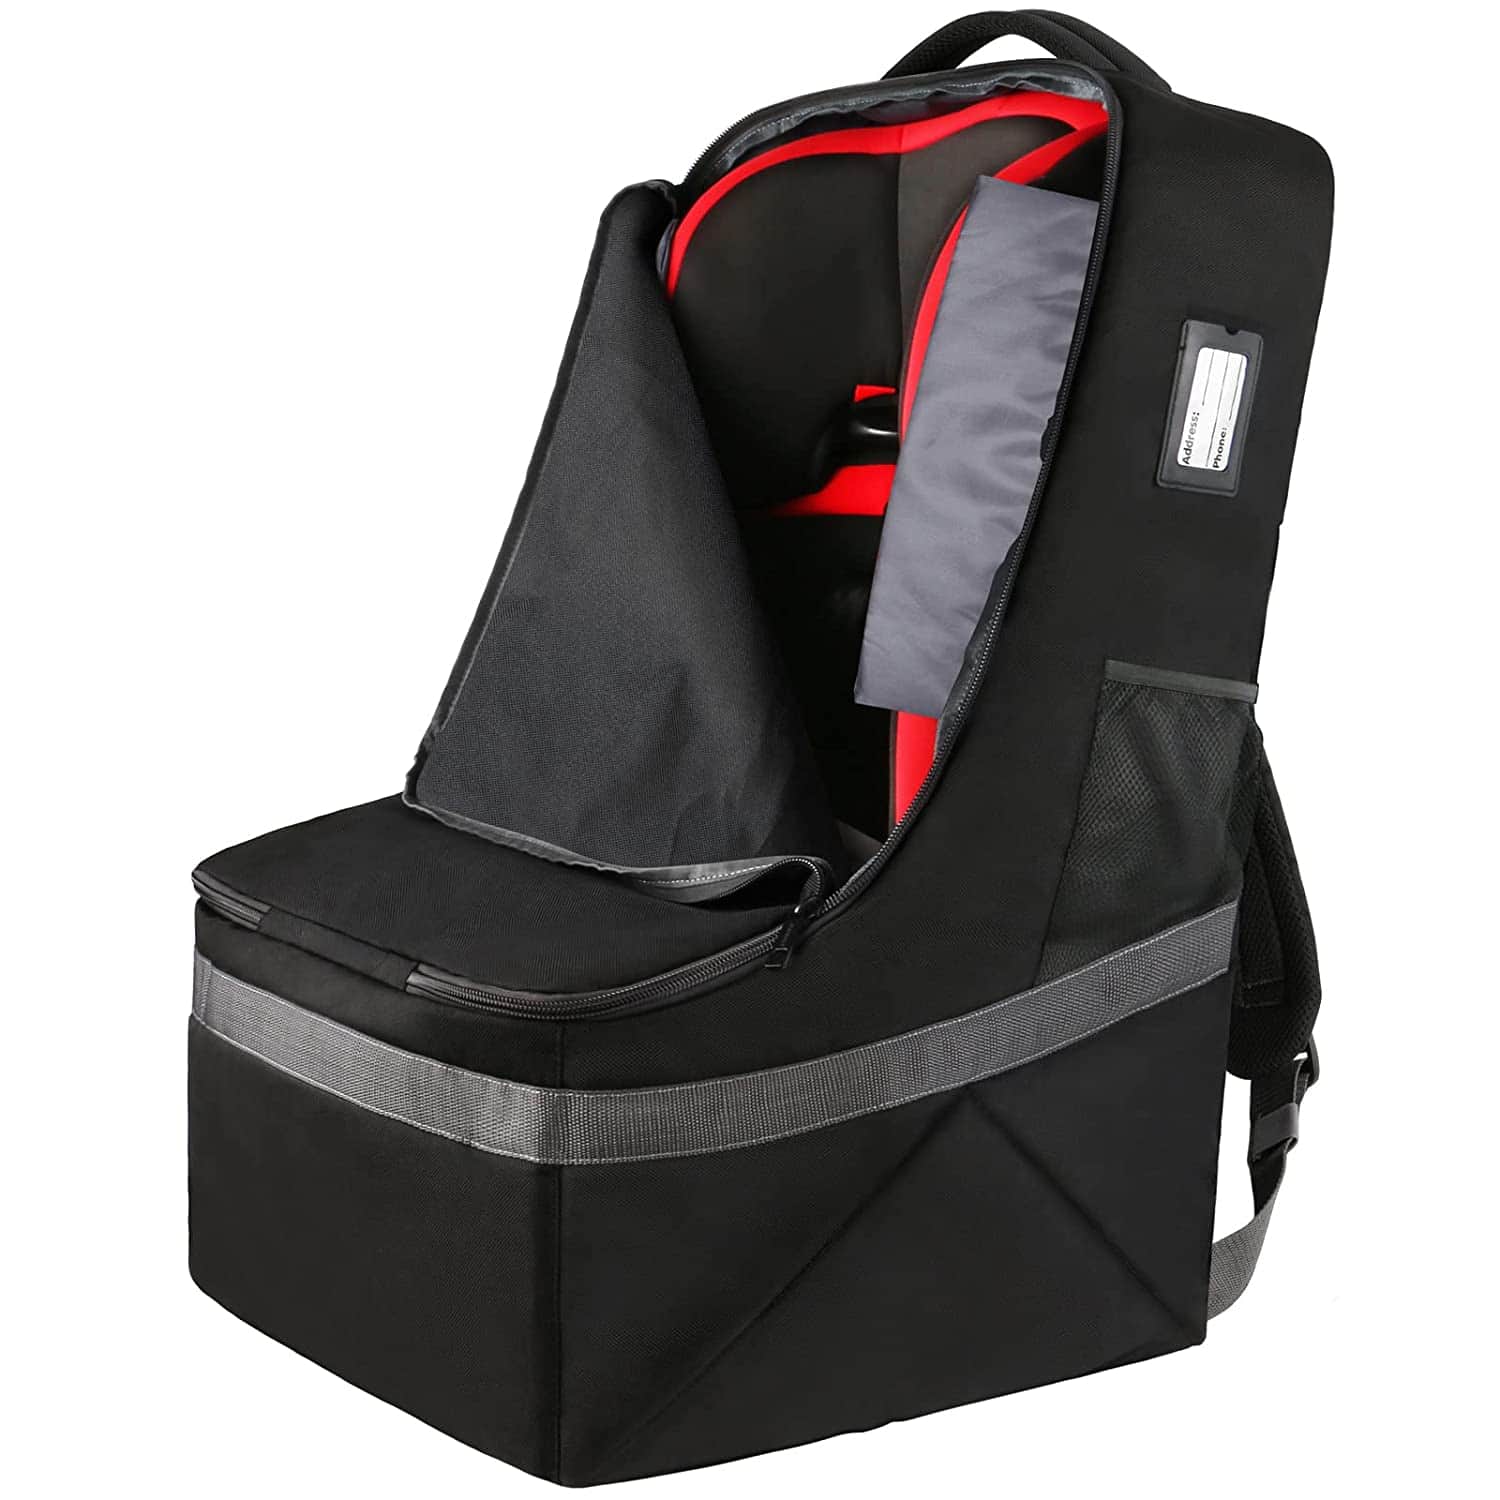 A backpack that fits your car seat.